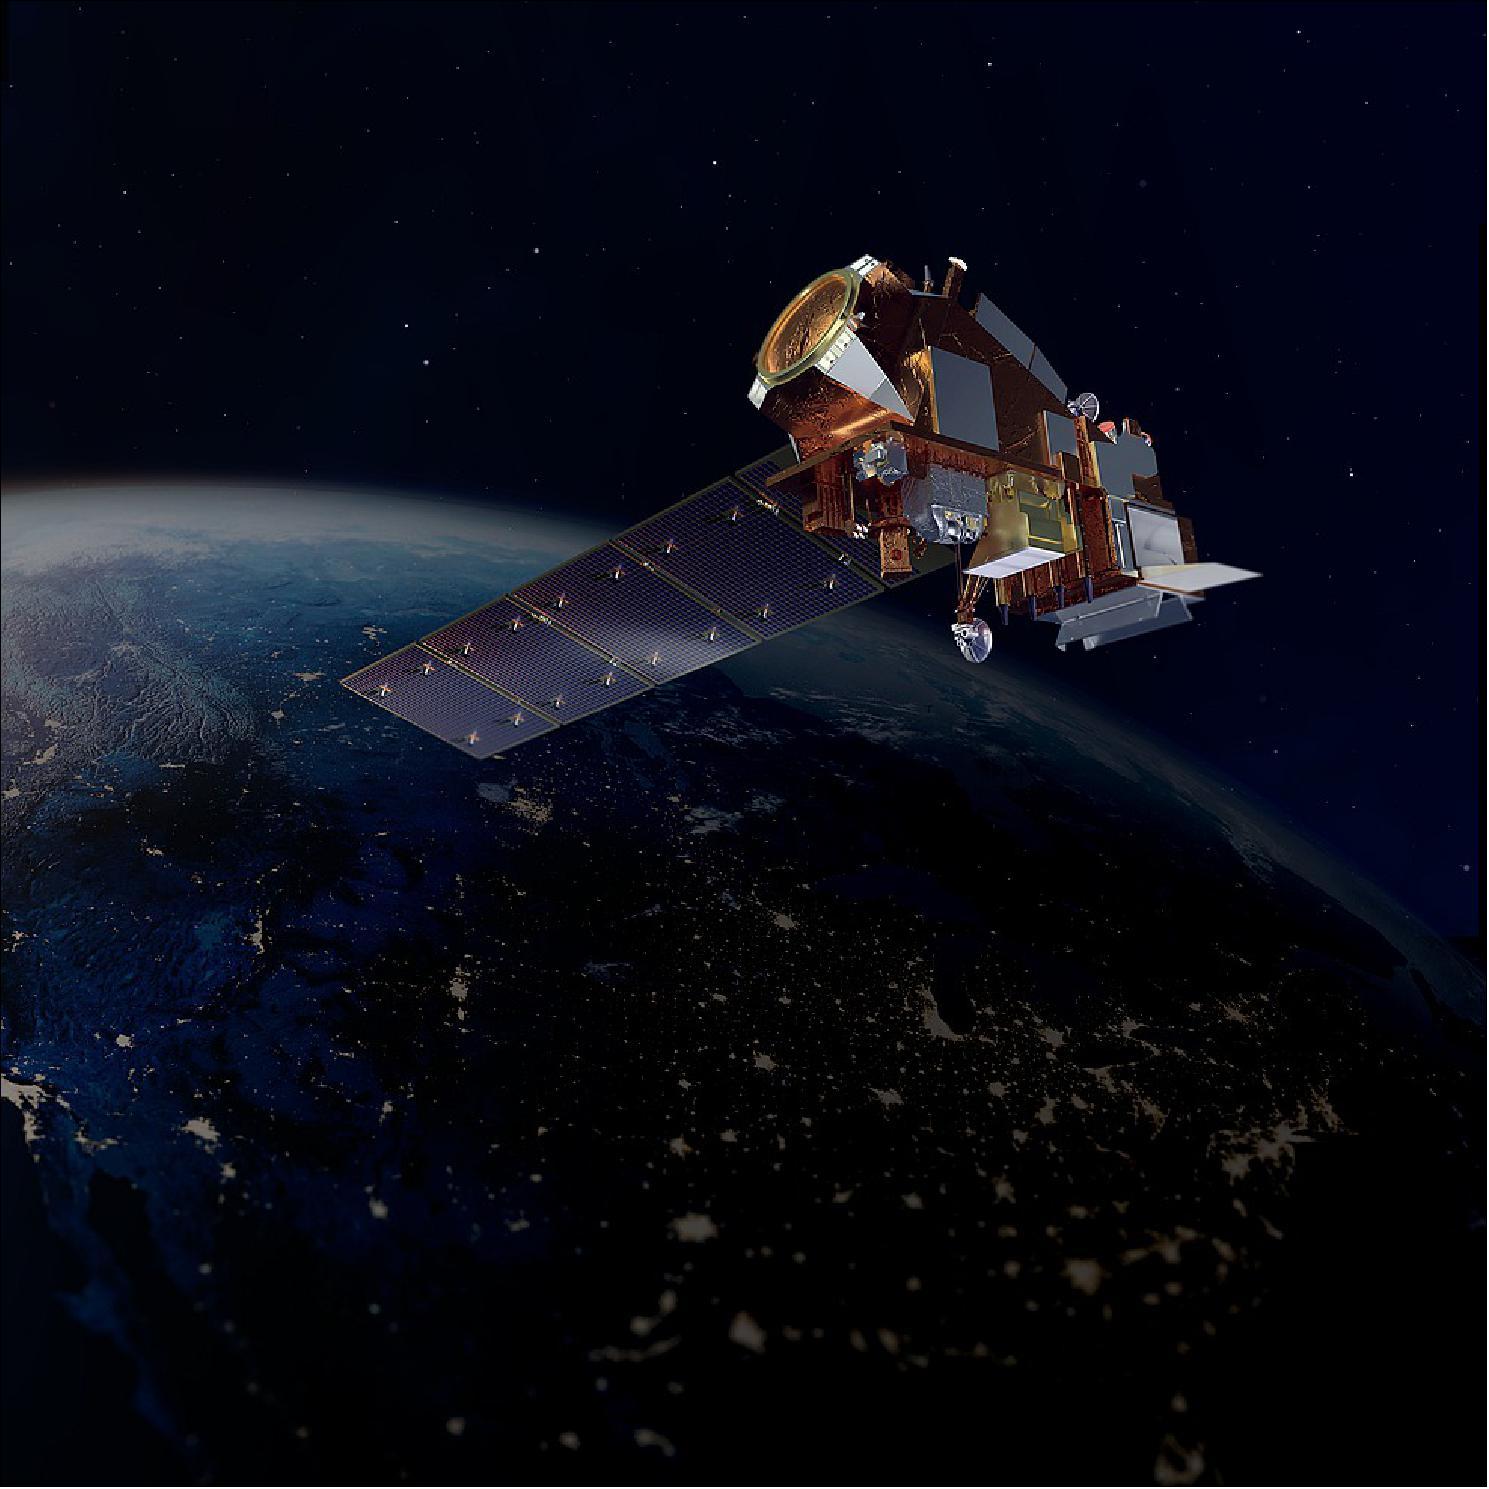 Figure 3: An artist's rendering of the JPSS-2 satellite, which will be renamed NOAA-21 once in orbit (image credit: NOAA)